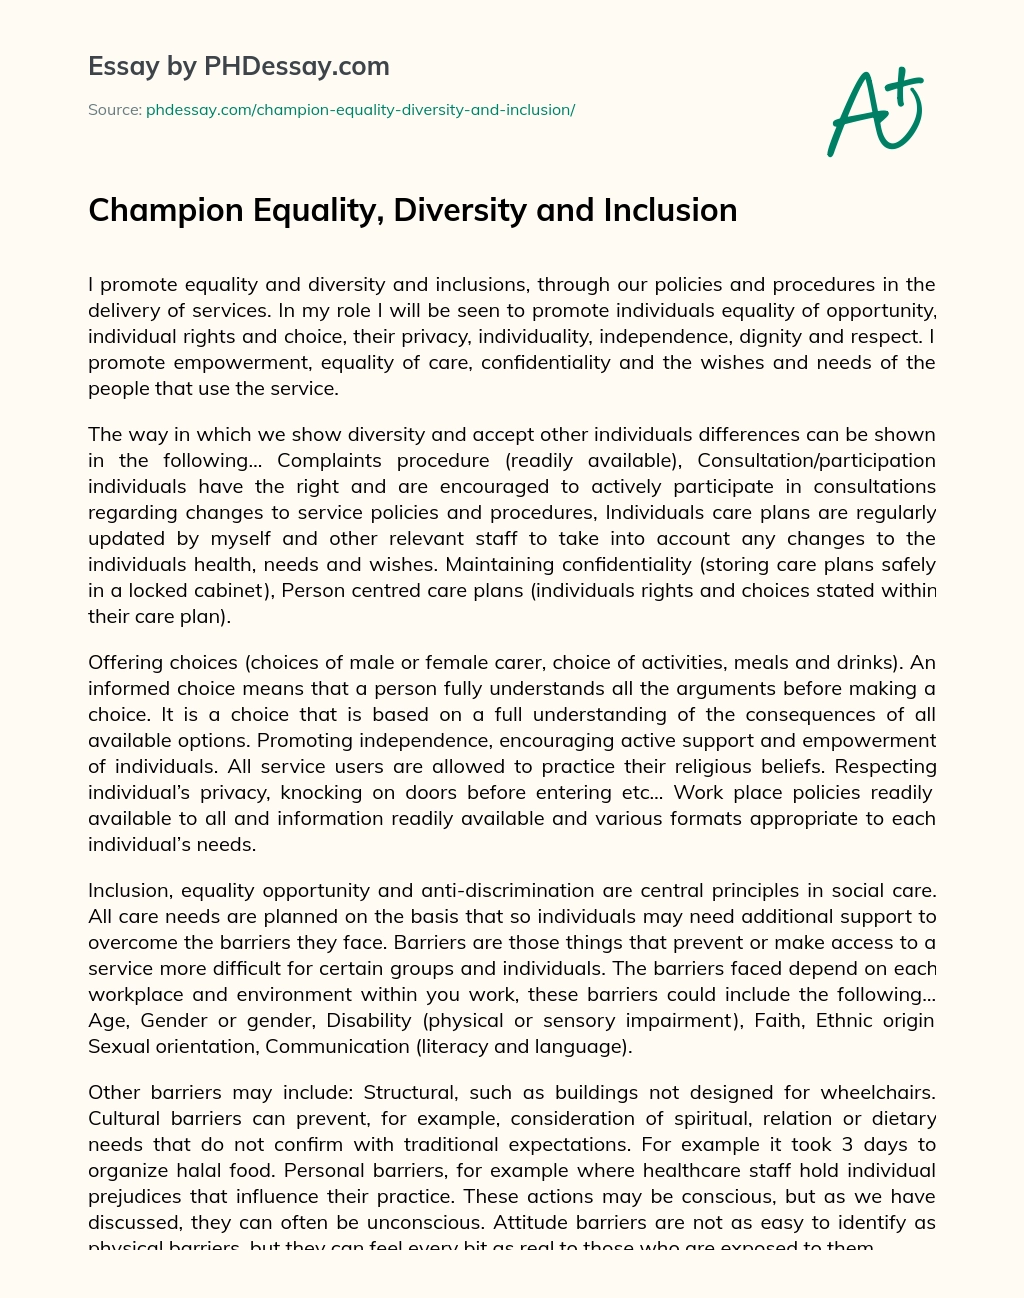 Champion Equality, Diversity and Inclusion essay